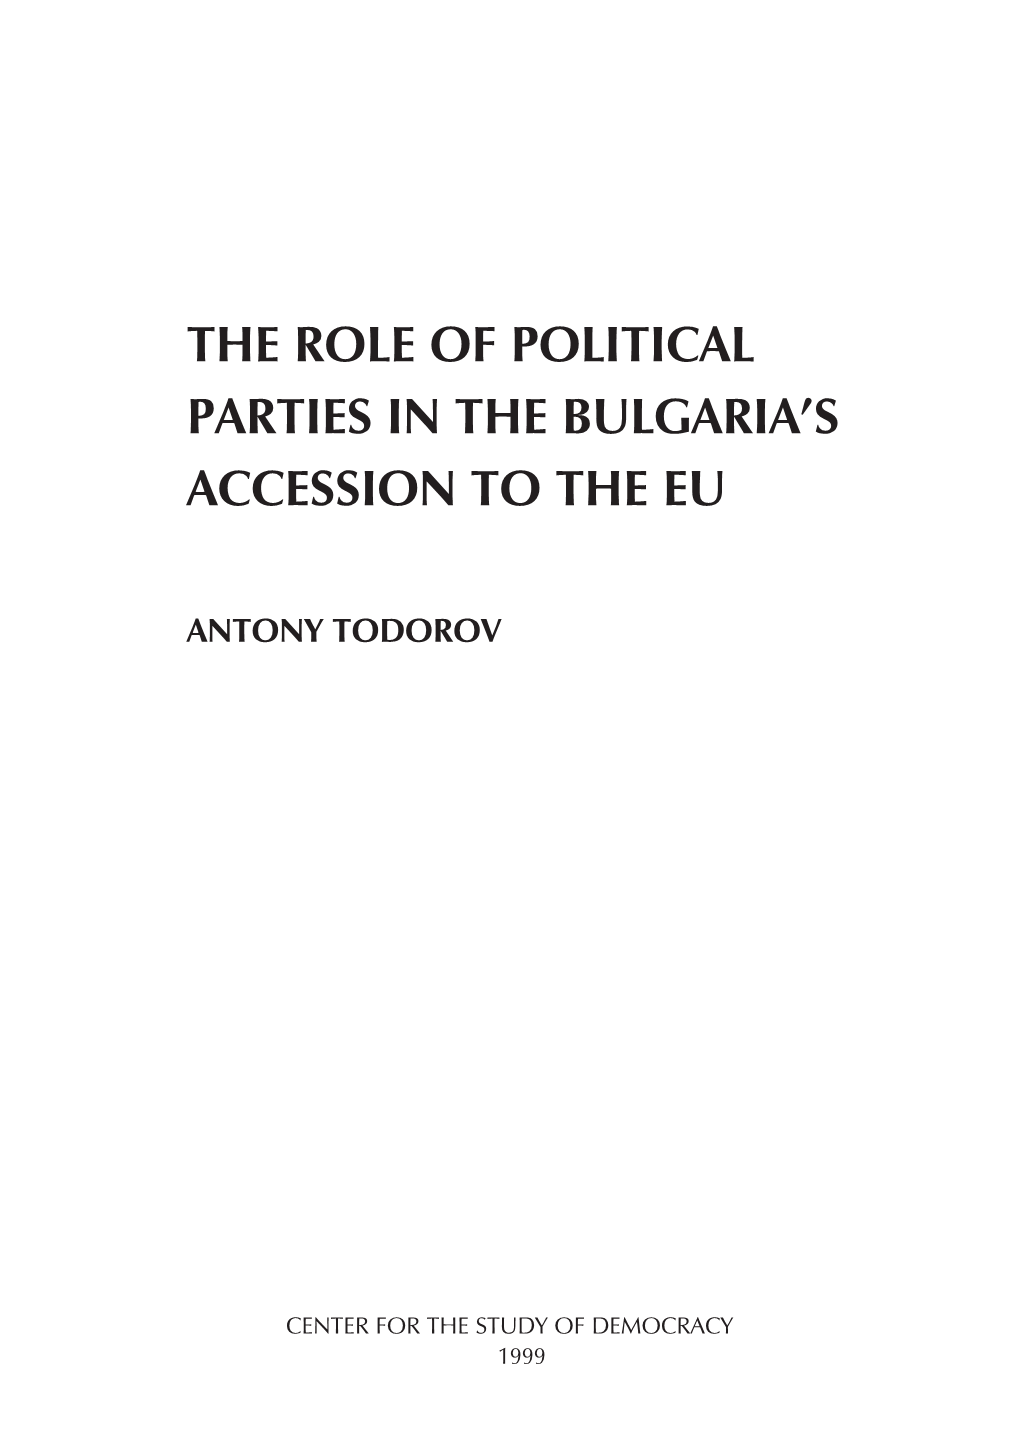 The Role of Political Parties in Accession to the EU